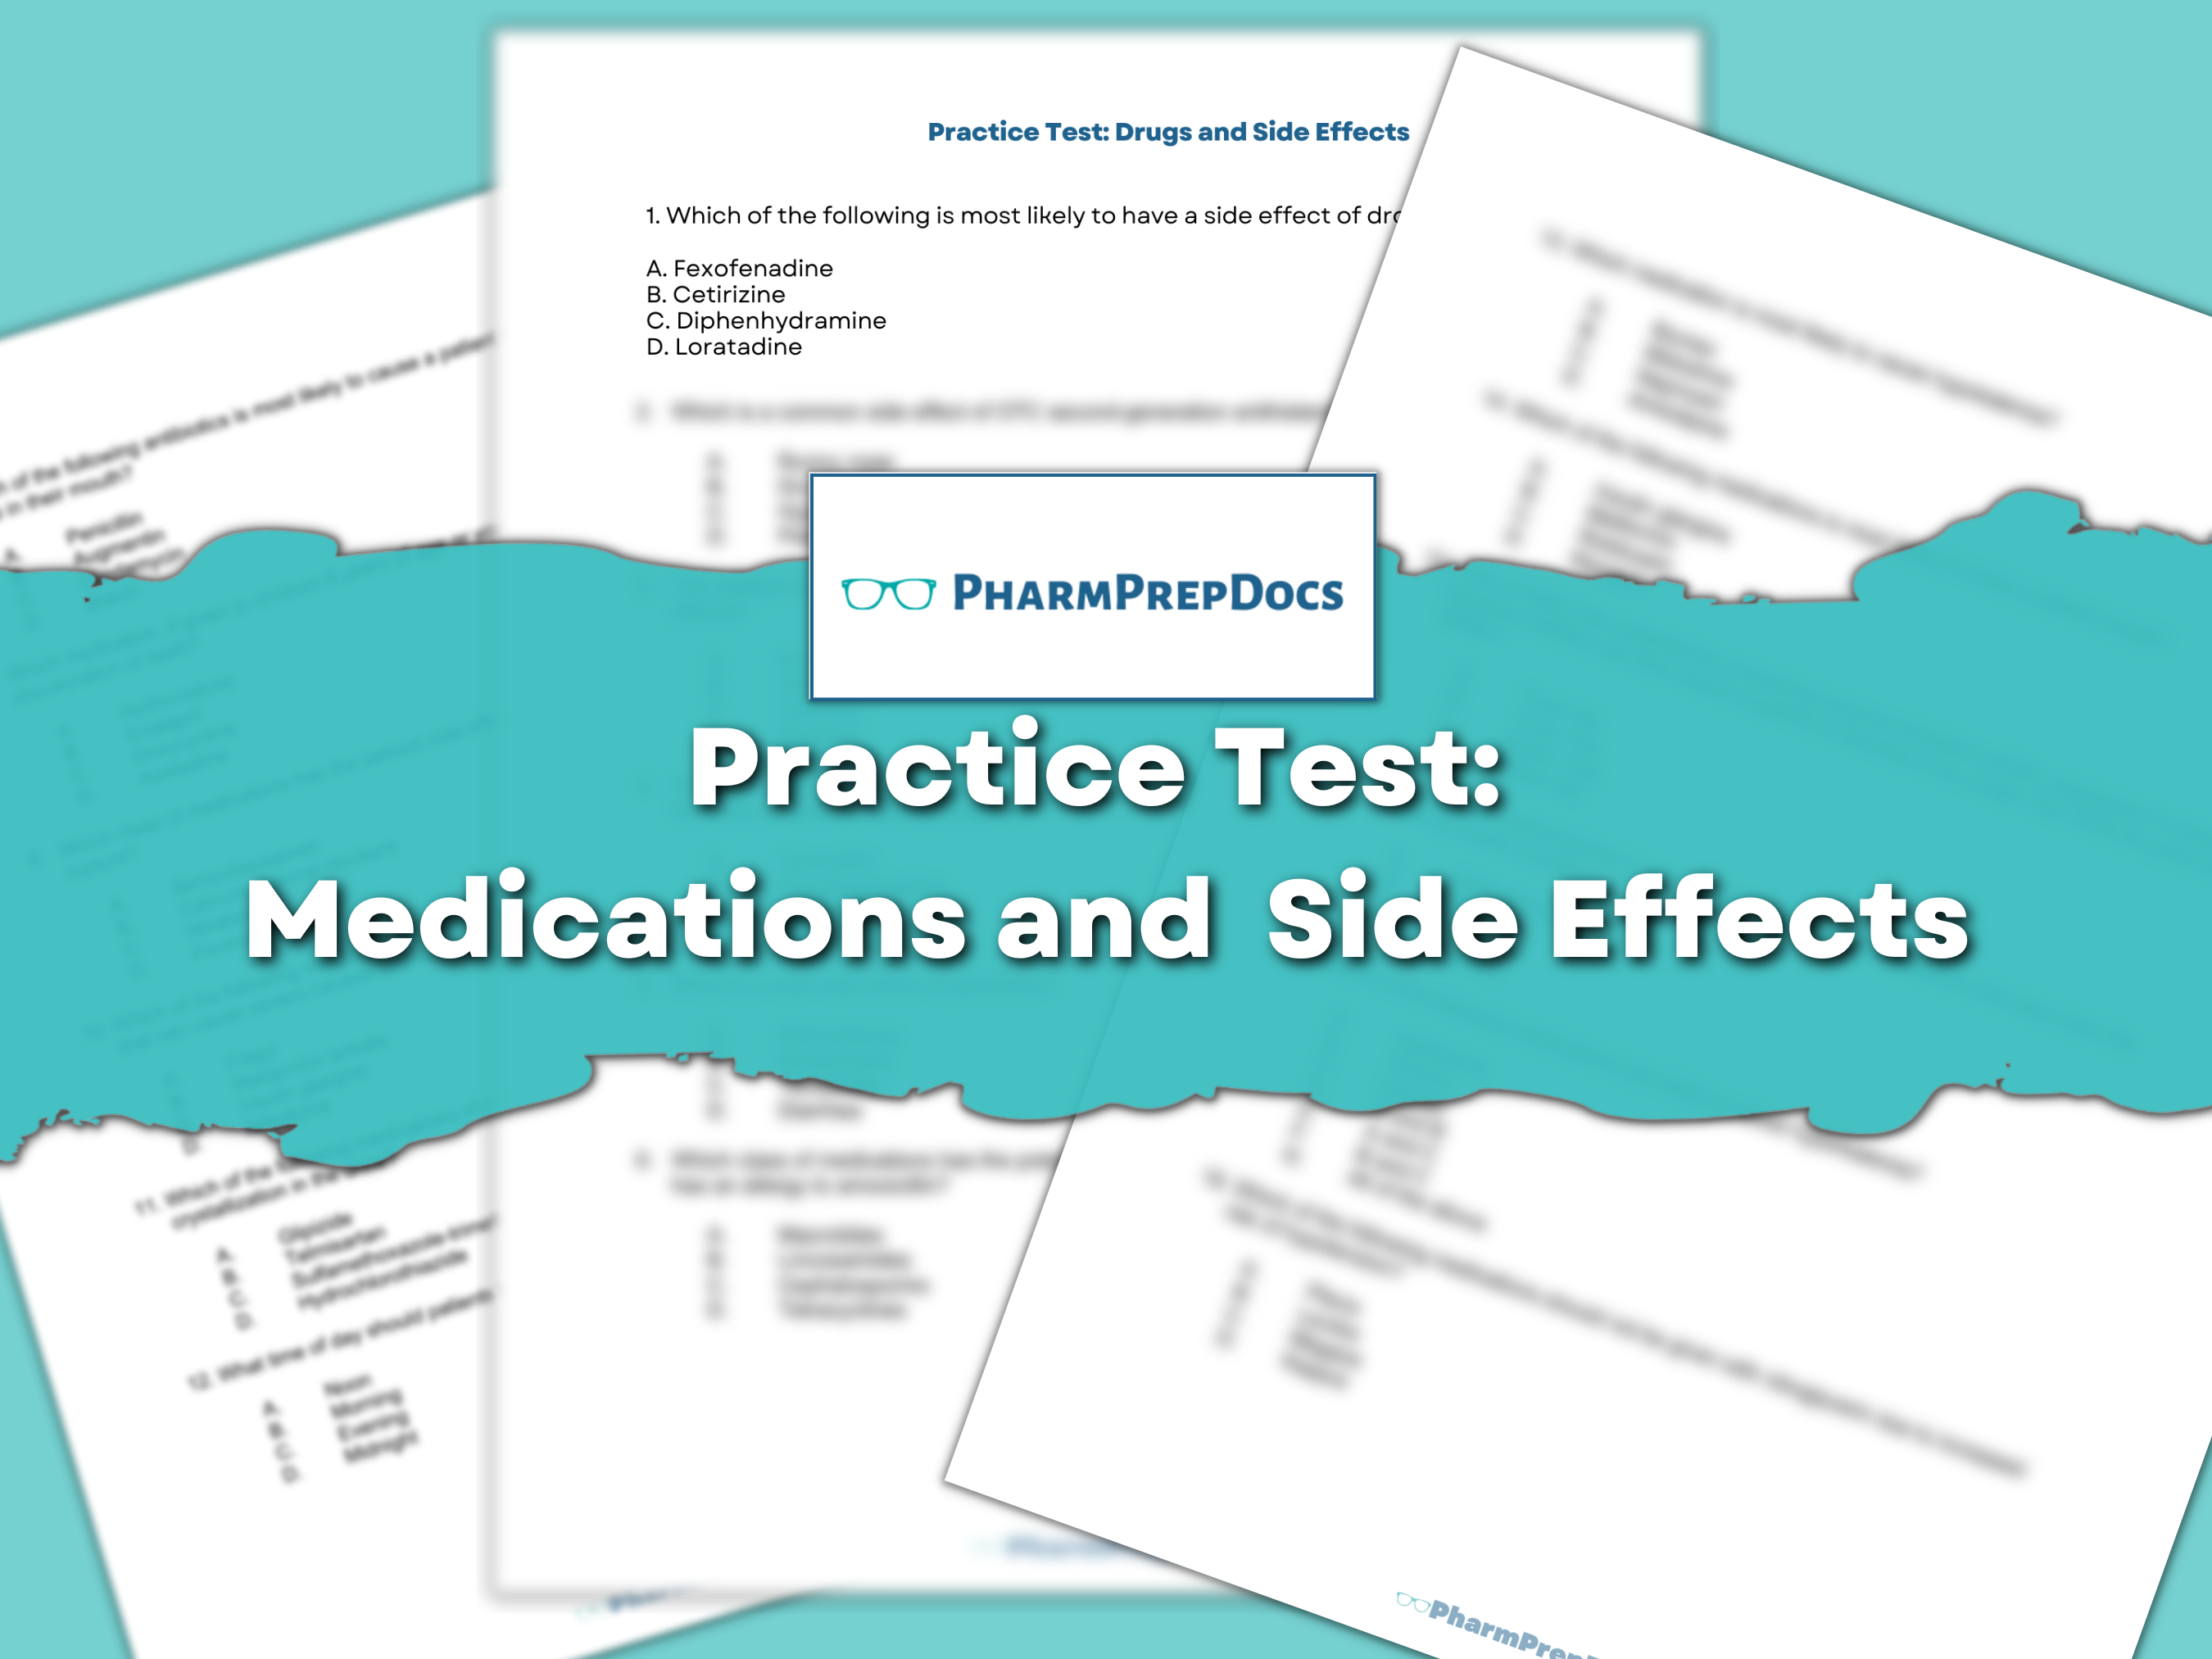 Practice Test: Medications and Side Effects